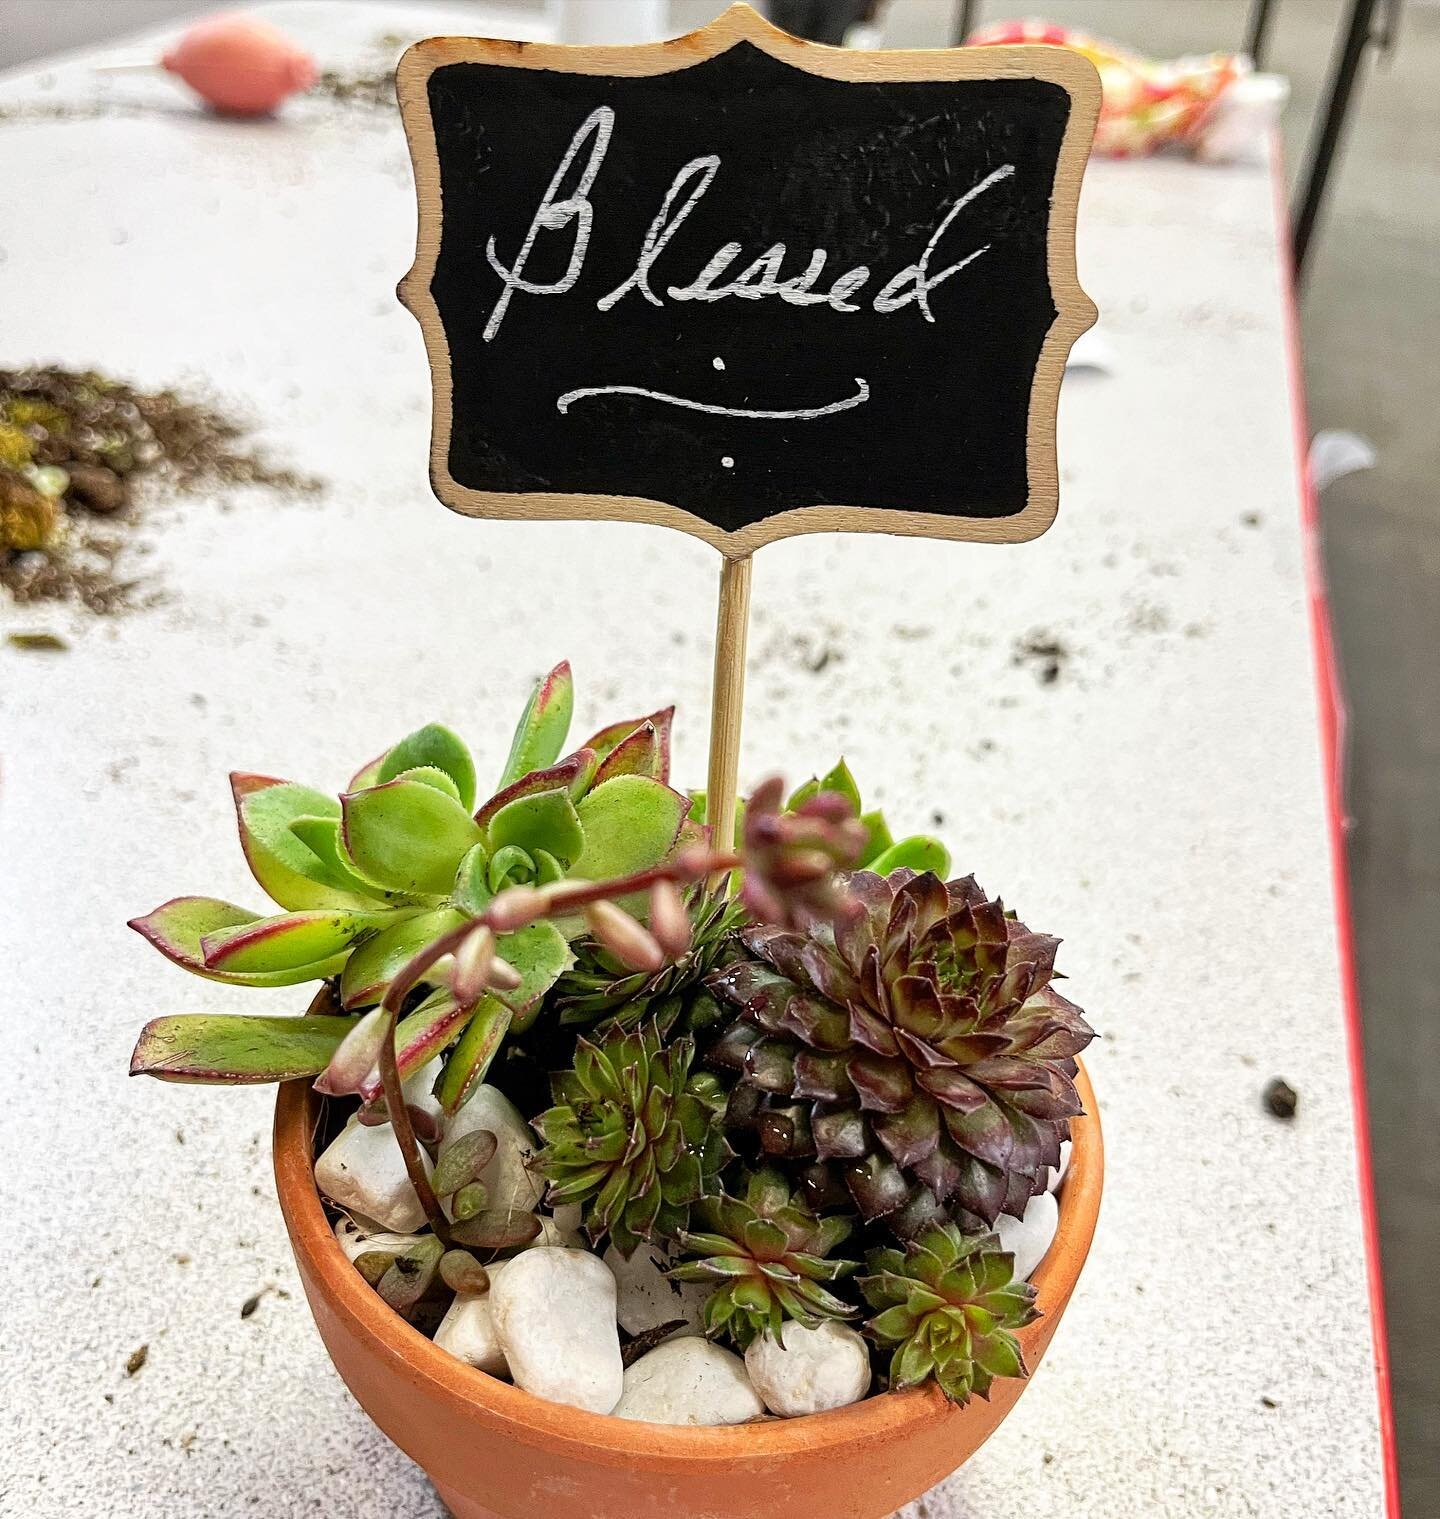 💚Plants &amp; Positivity 💚Yesterdays Mindful Gardening Participants put together some really adorable succulent pieces. 
It was such a positive and inviting time filled with laughter and learning! 
.
#mindfulgardening #plants #succulentarrangement 